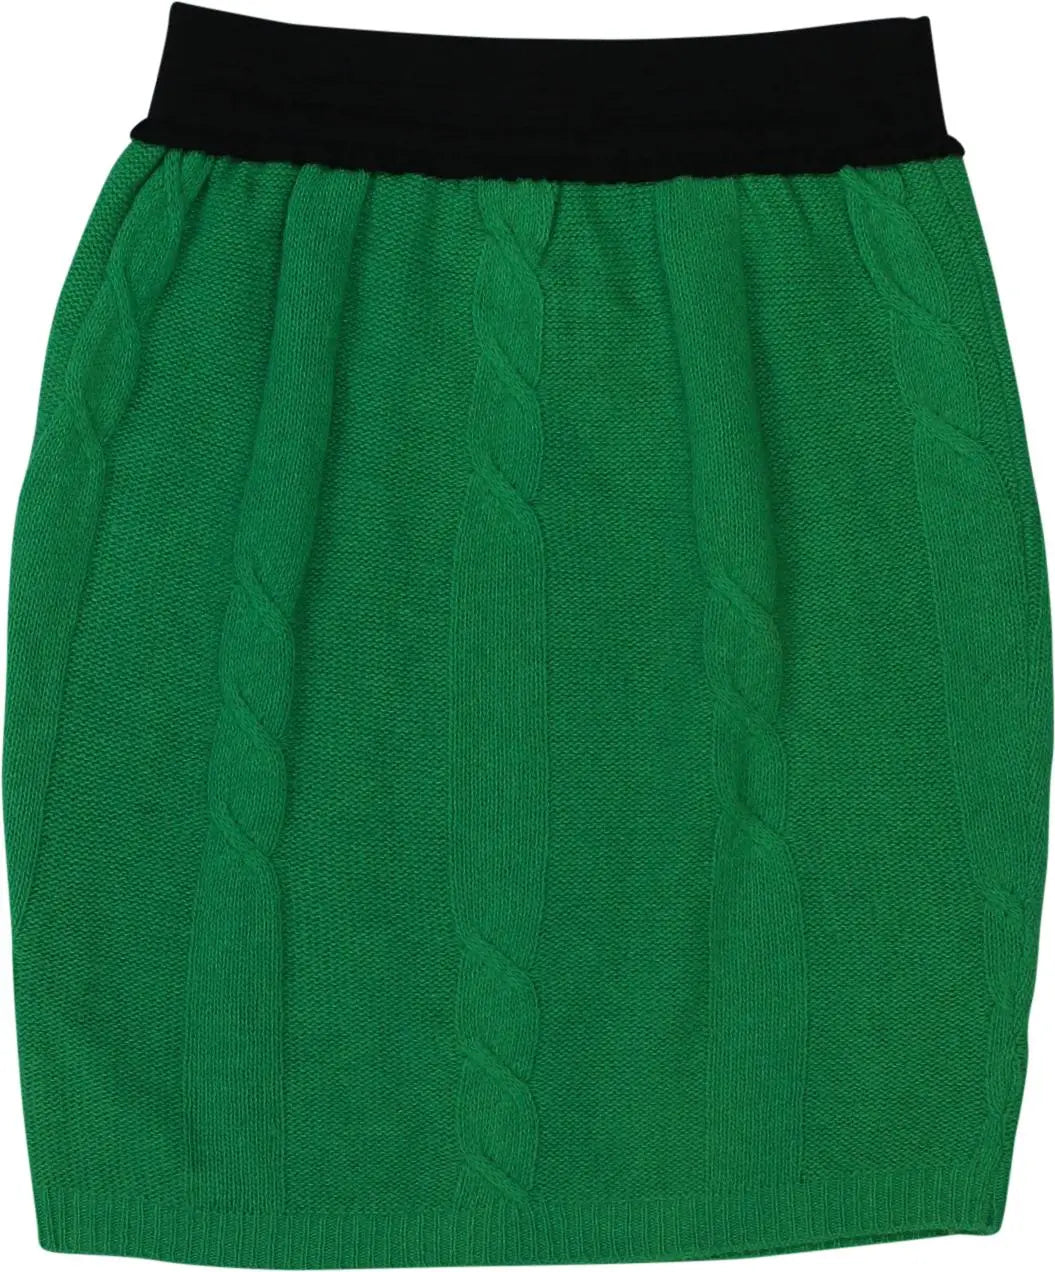 Unknown - Green Knitted Skirt- ThriftTale.com - Vintage and second handclothing